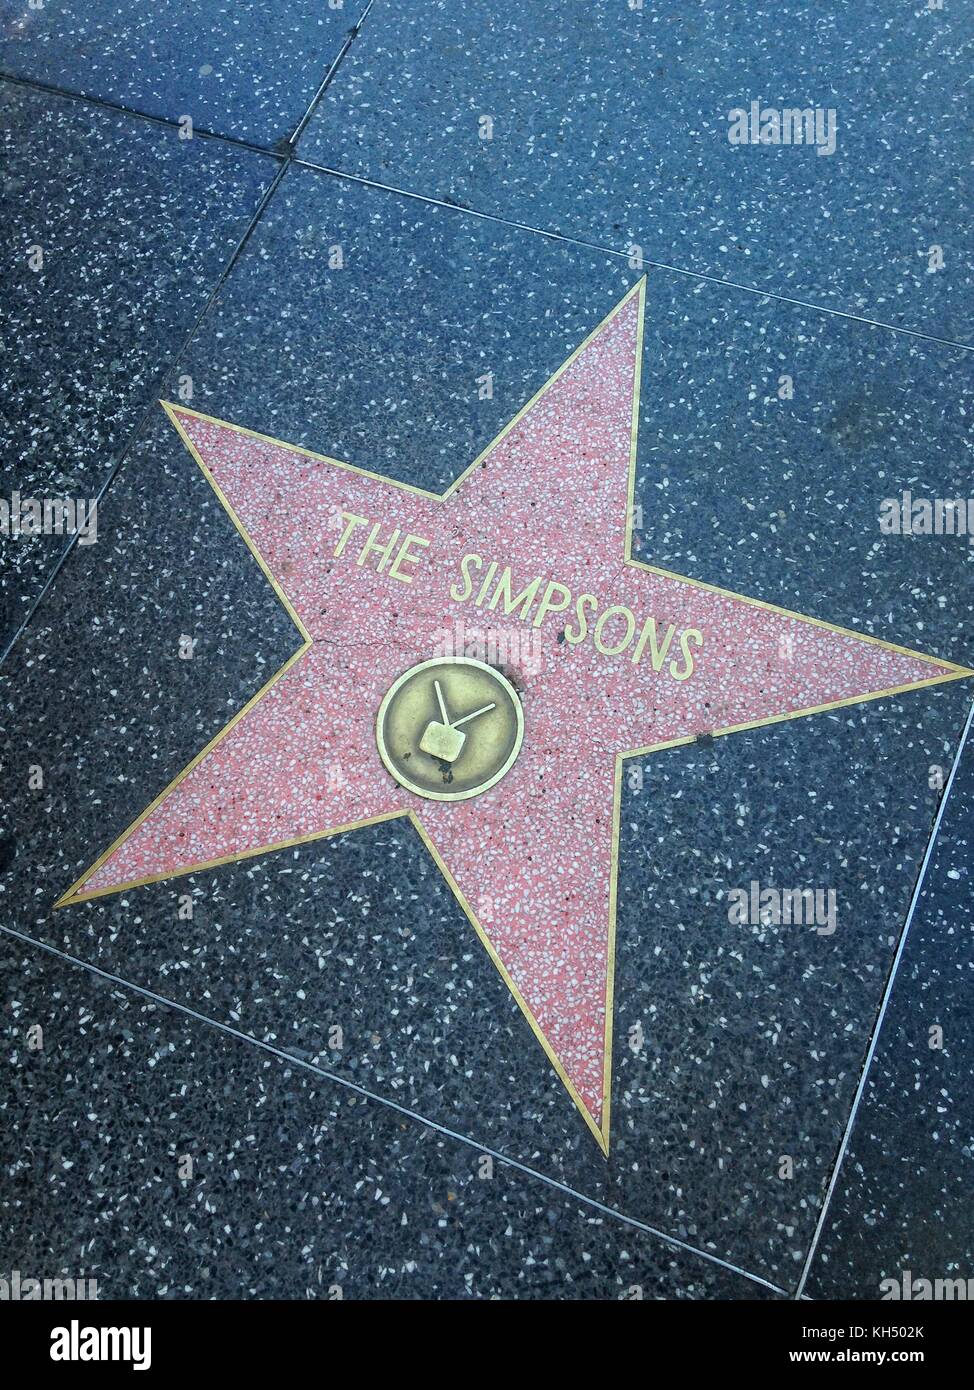 Hollywood, California - July 26 2017: The Simpsons Hollywood walk of fame star on July 26, 2017 in Hollywood, CA. Stock Photo